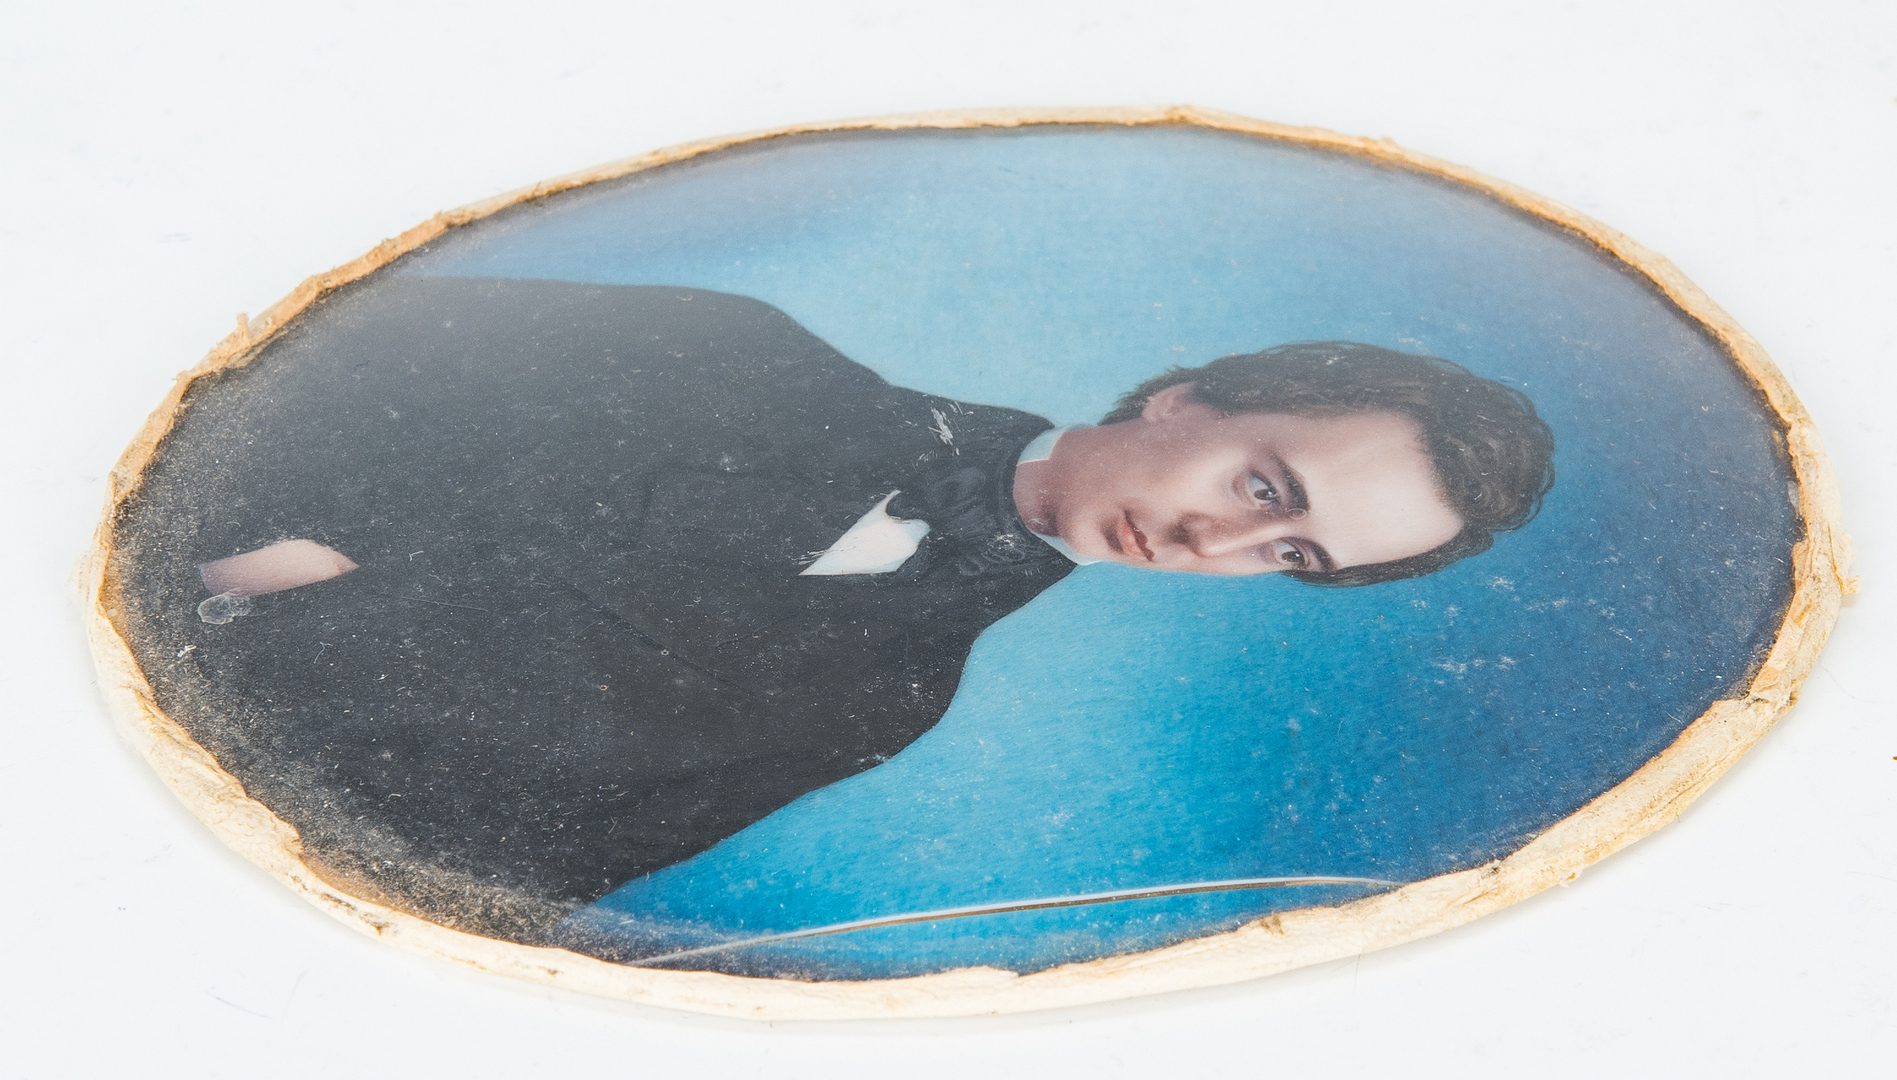 Lot 92: Pair NY miniature portraits, attr. Wagner Siblings